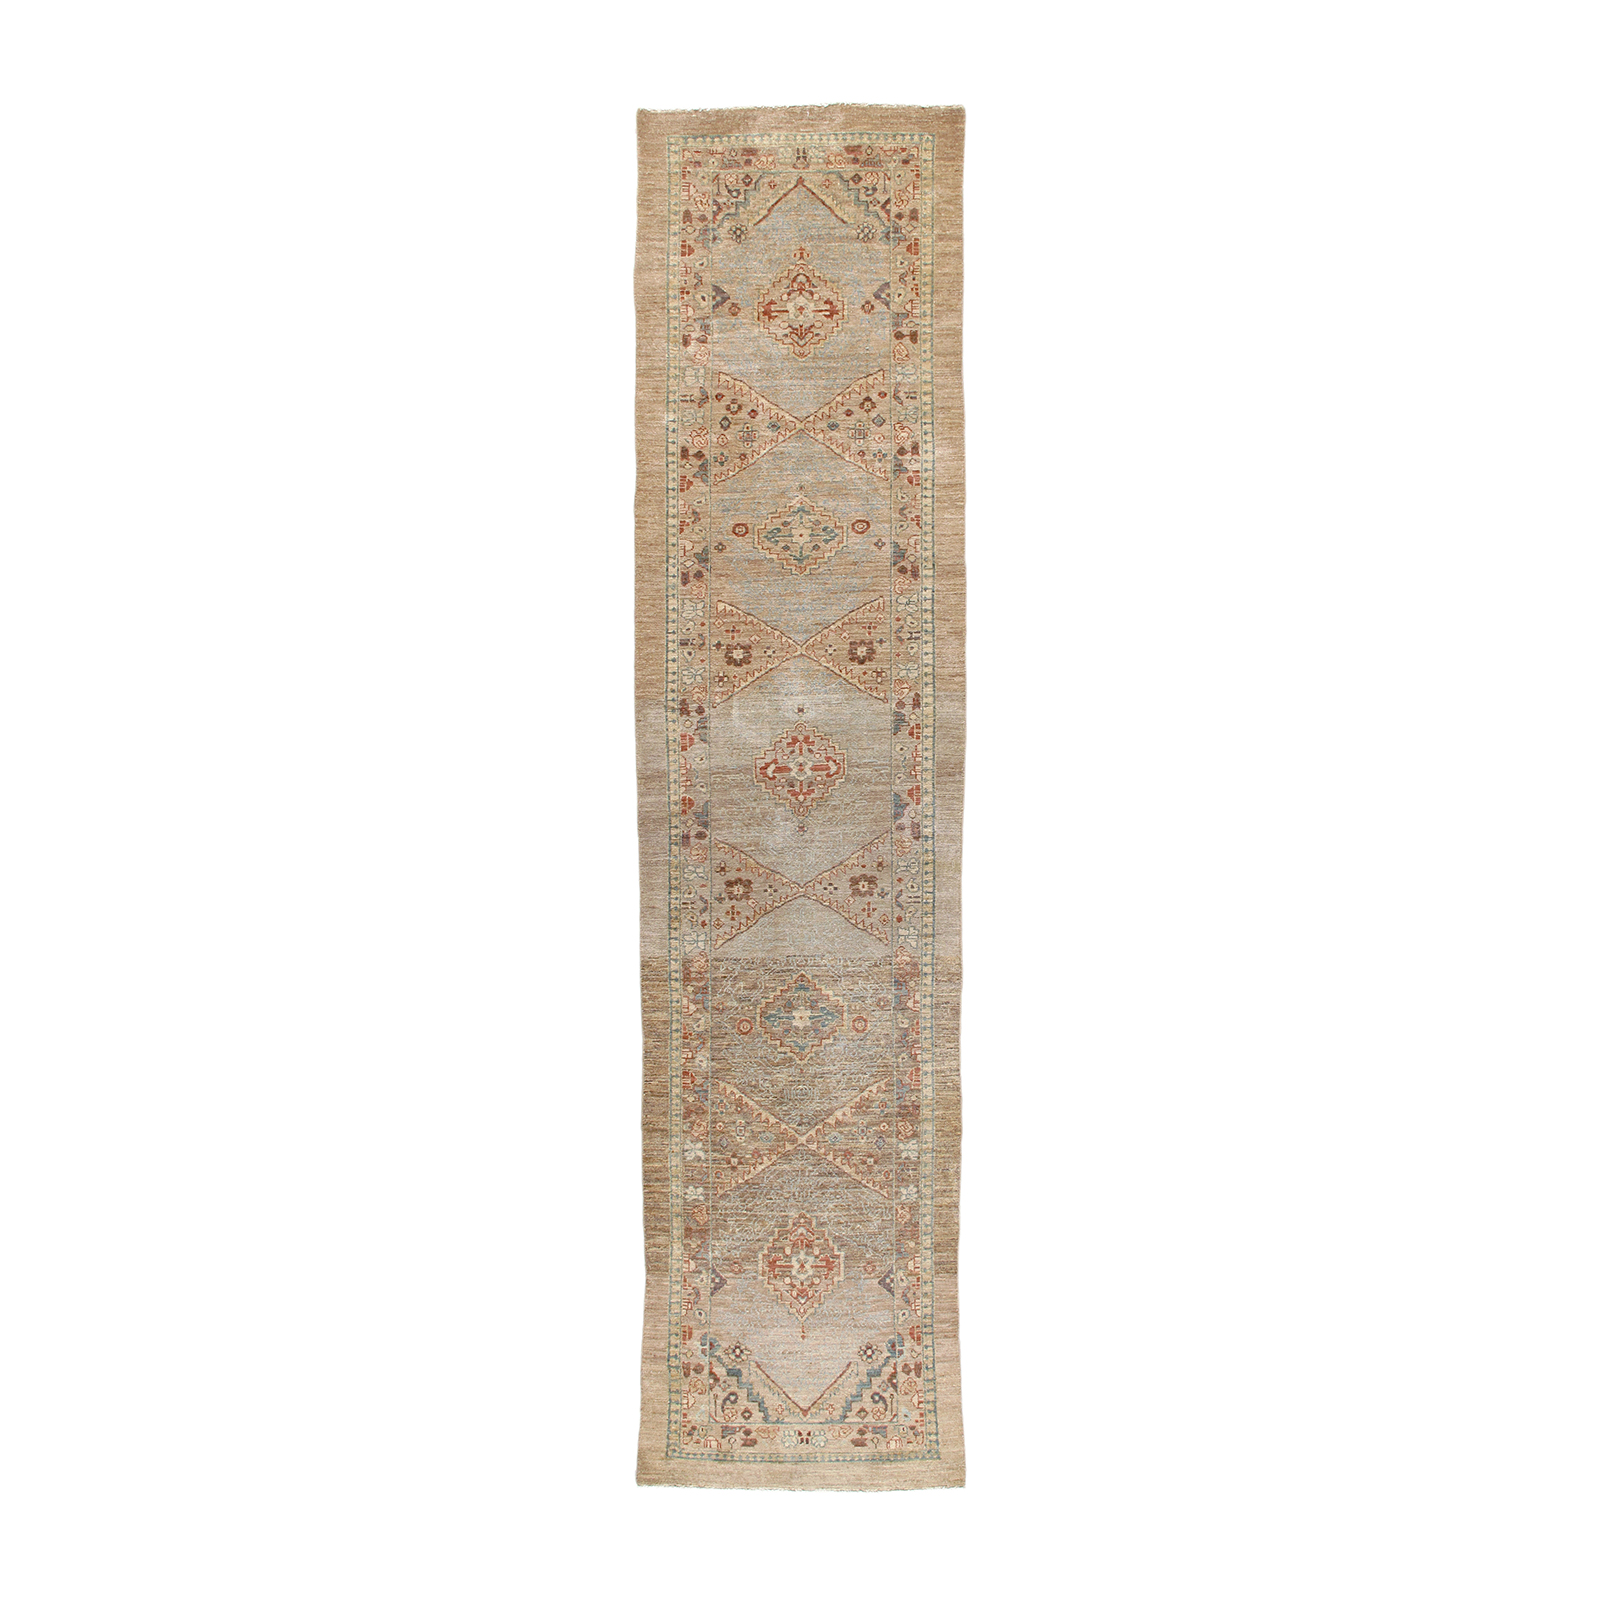 This Persian Kurdish runner is hand-knotted runner and crafted with the finest hand-carded, hand-spun wool.